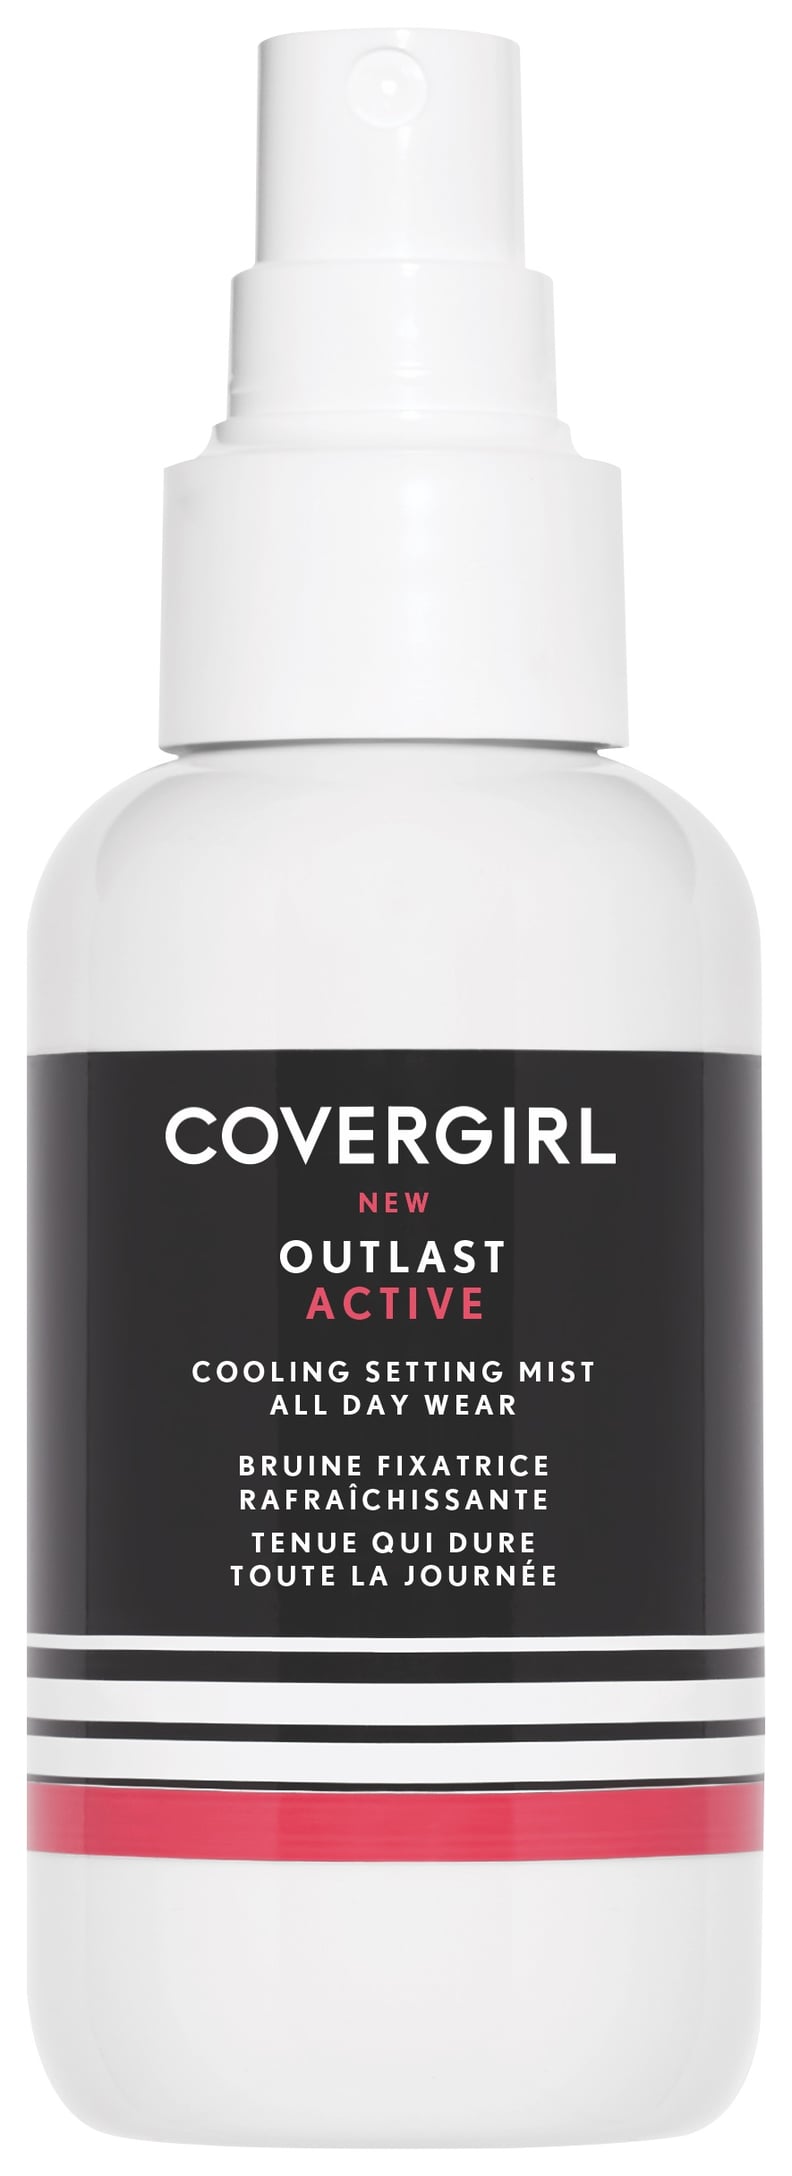 CoverGirl Outlast Active Cooling Setting Mist